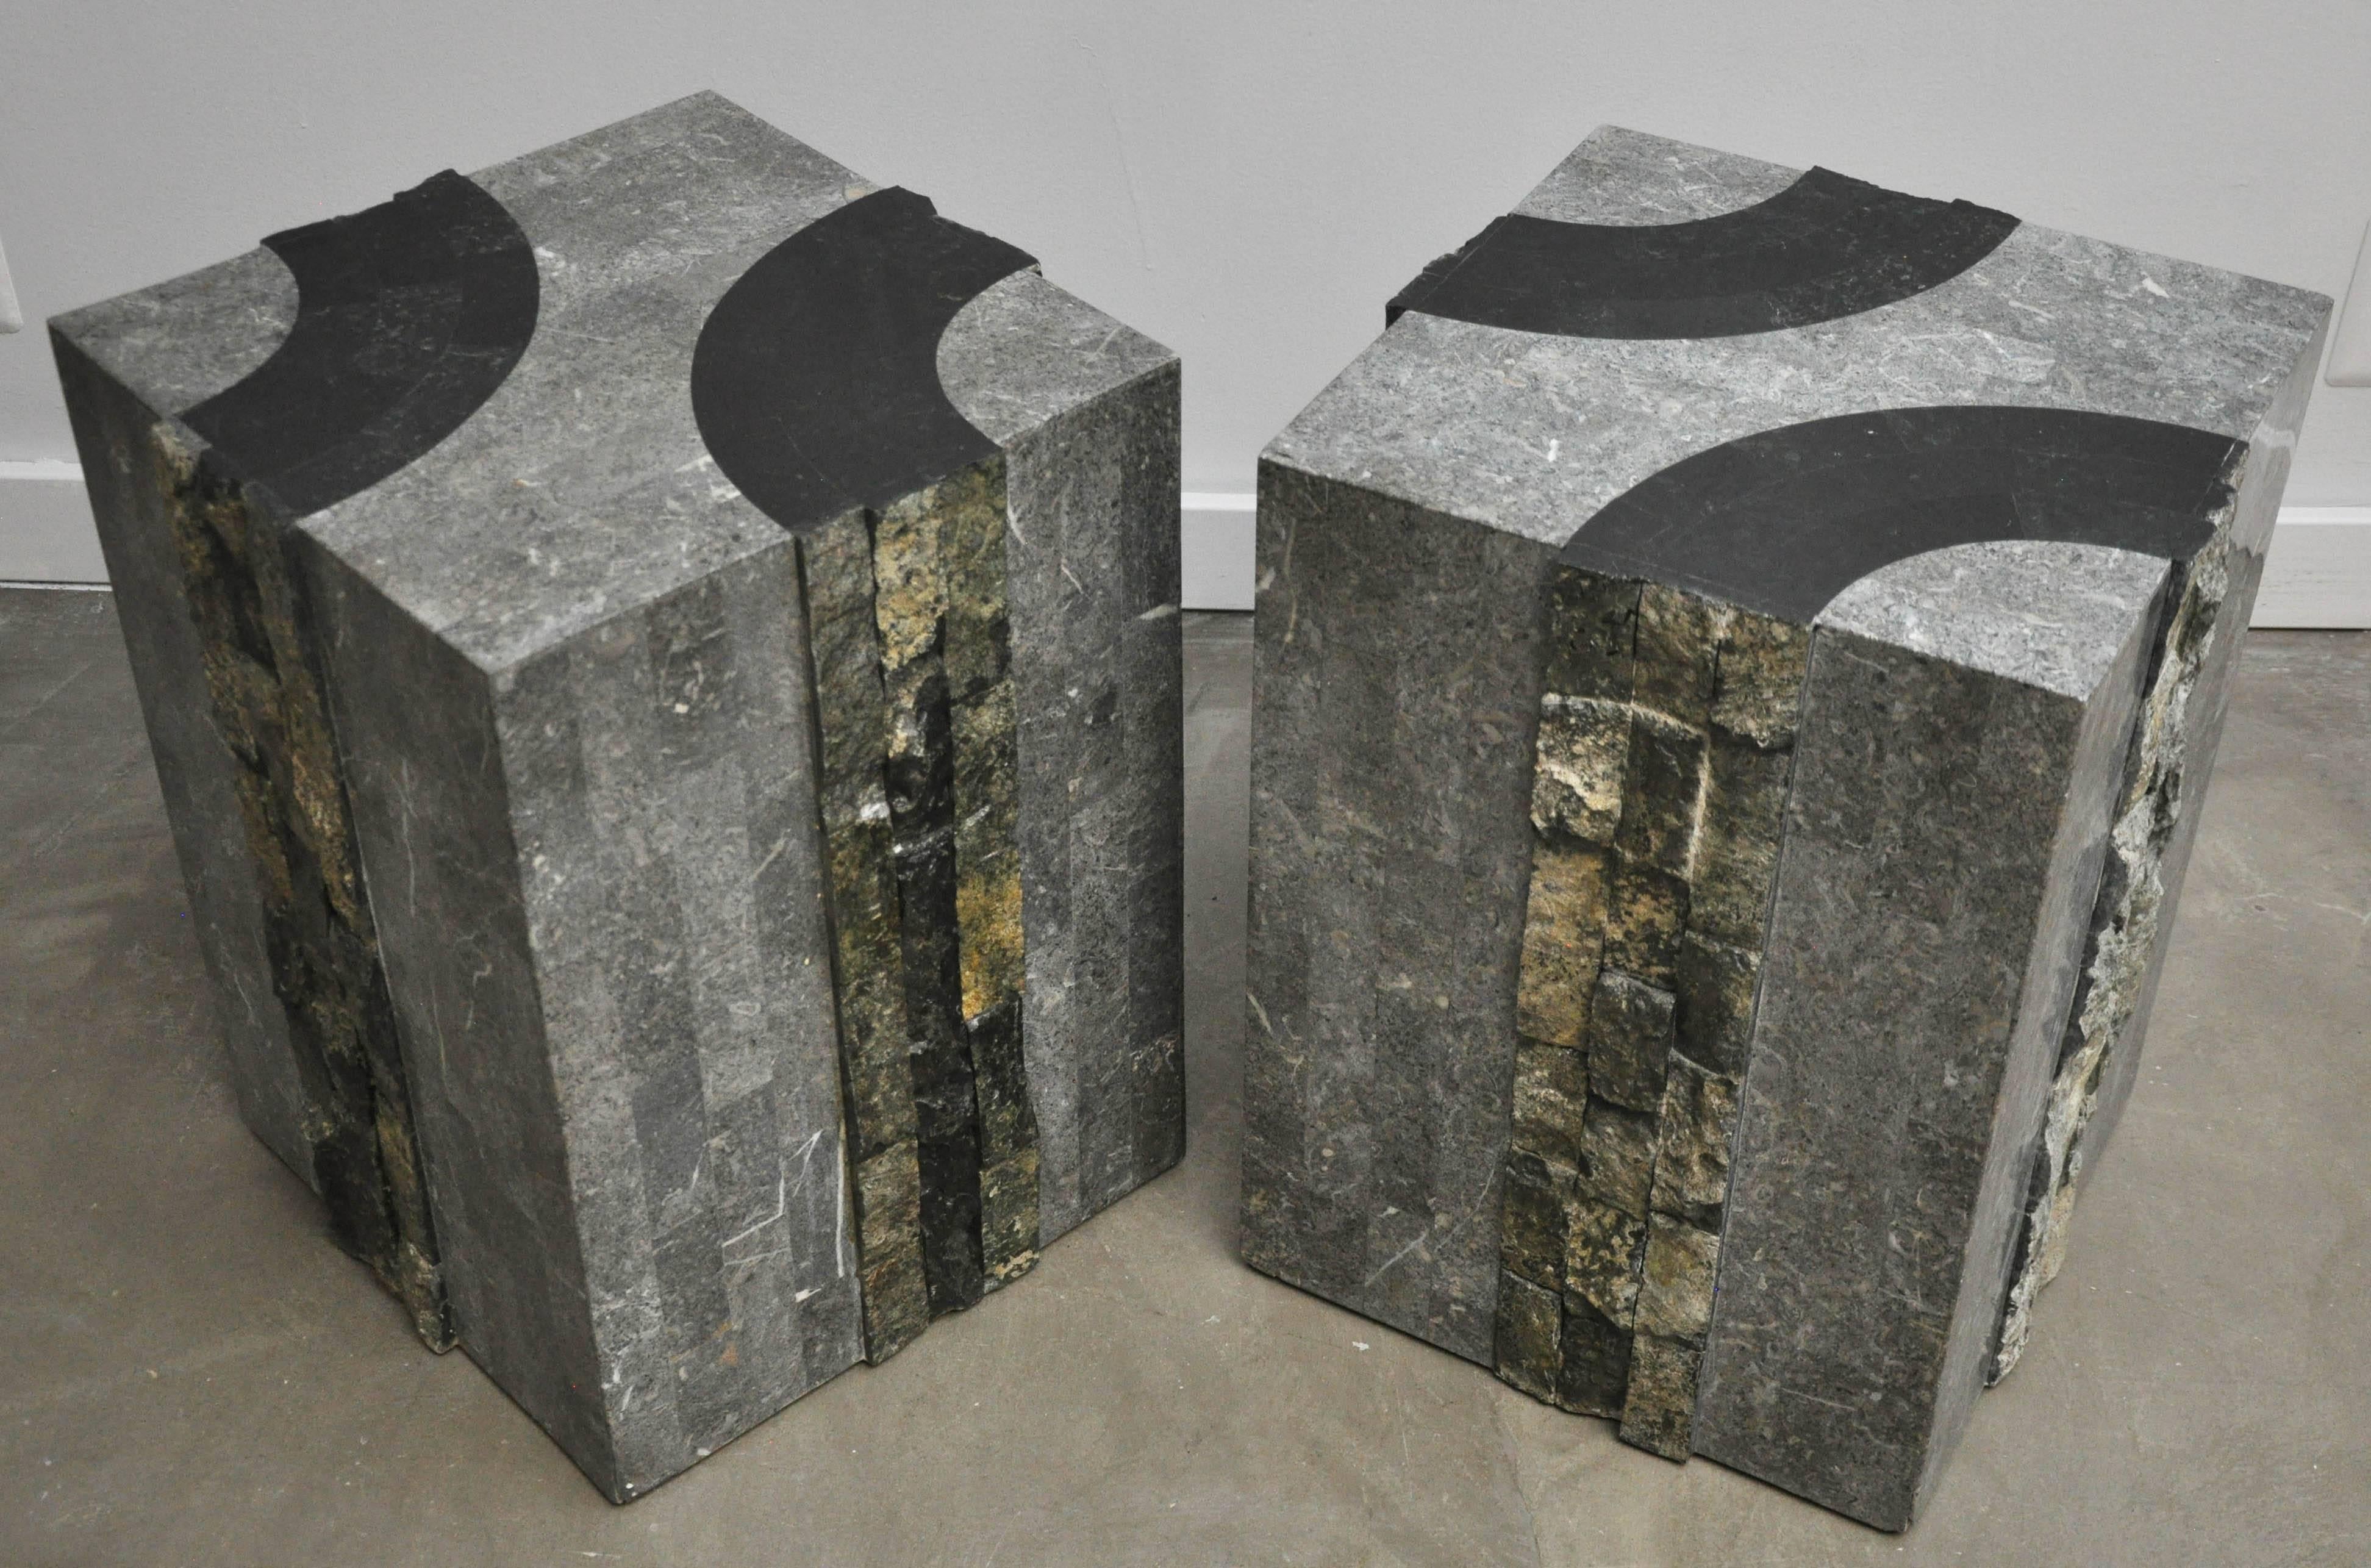 Pair of side tables in tessellated stone with graphic marble inlays, circa 1980s.